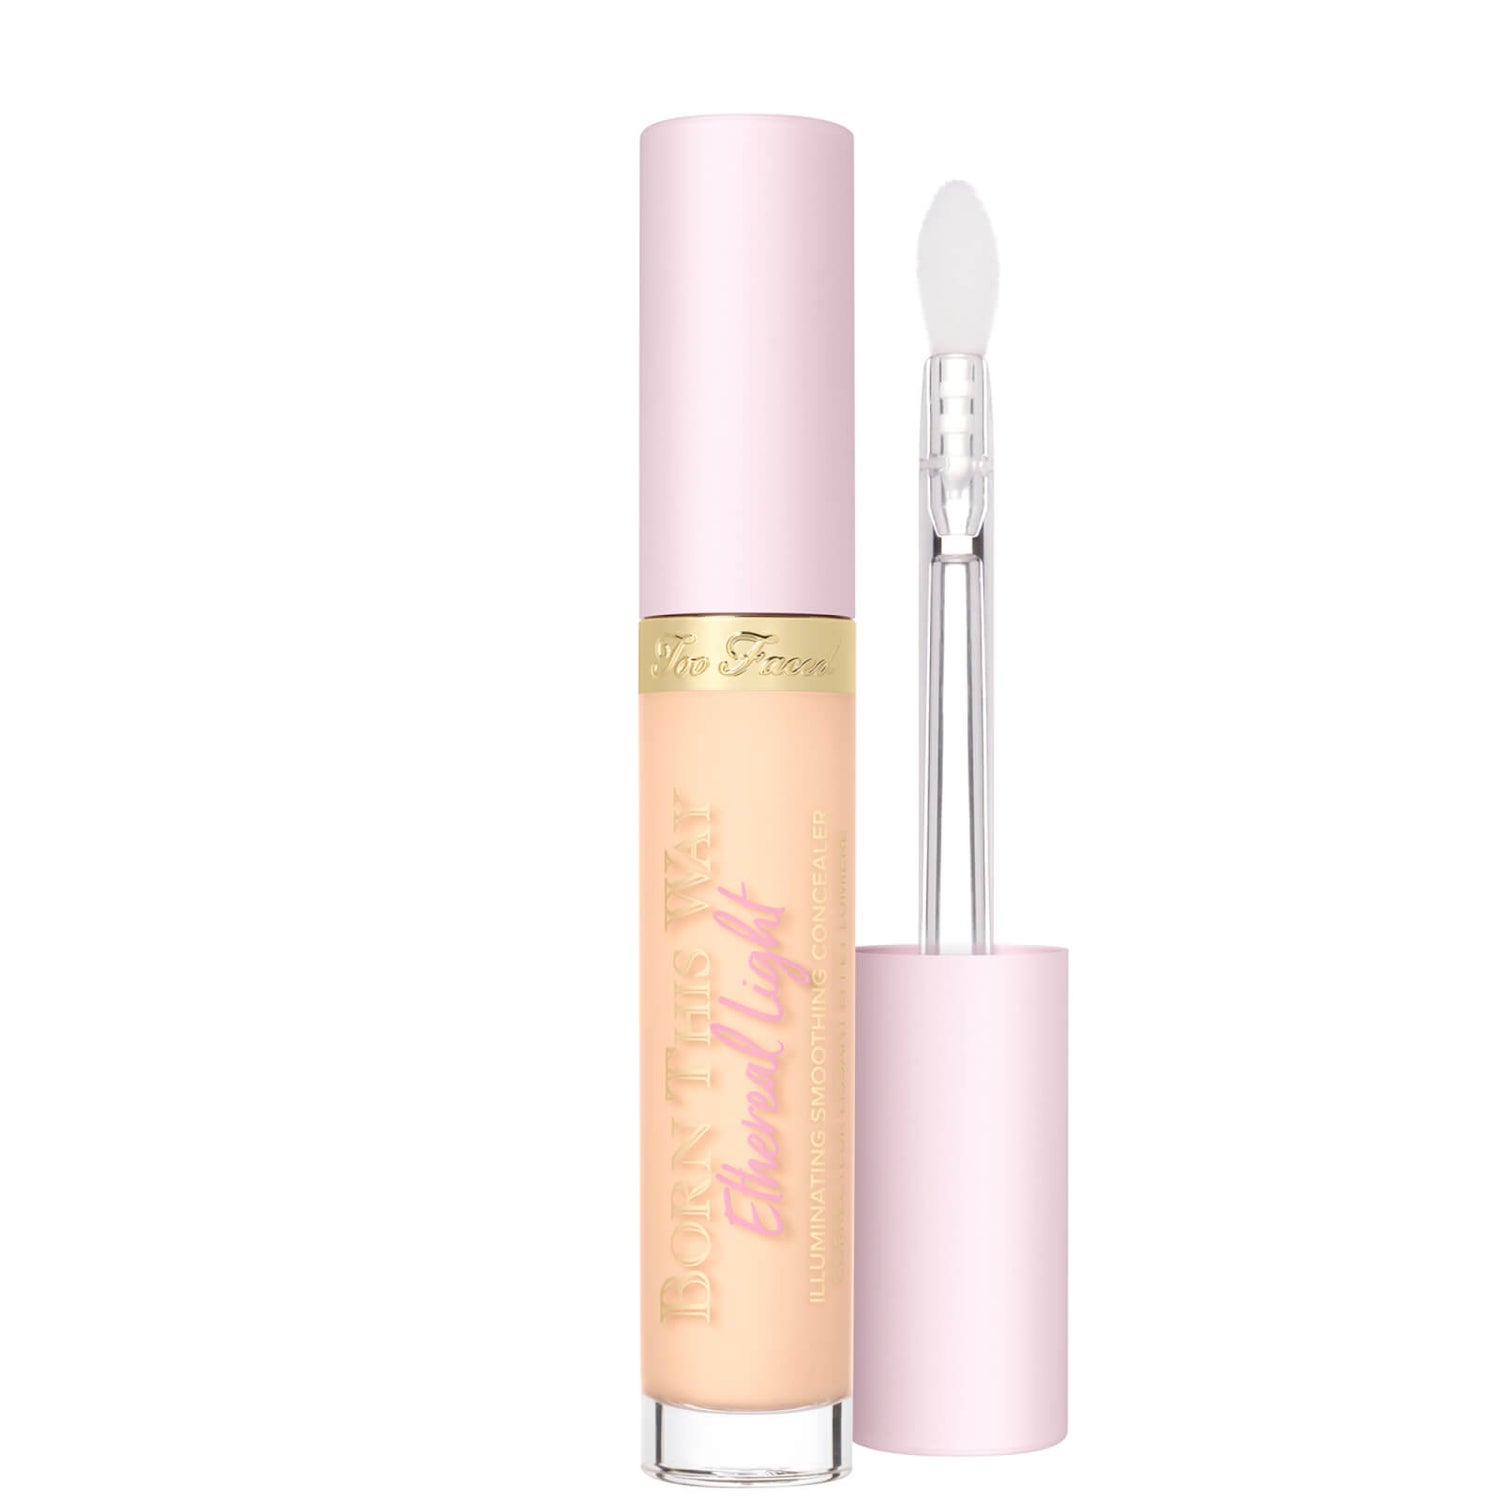 Too Faced Born This Way Ethereal Light Illuminating Smoothing Concealer 5ml (Various Shades)